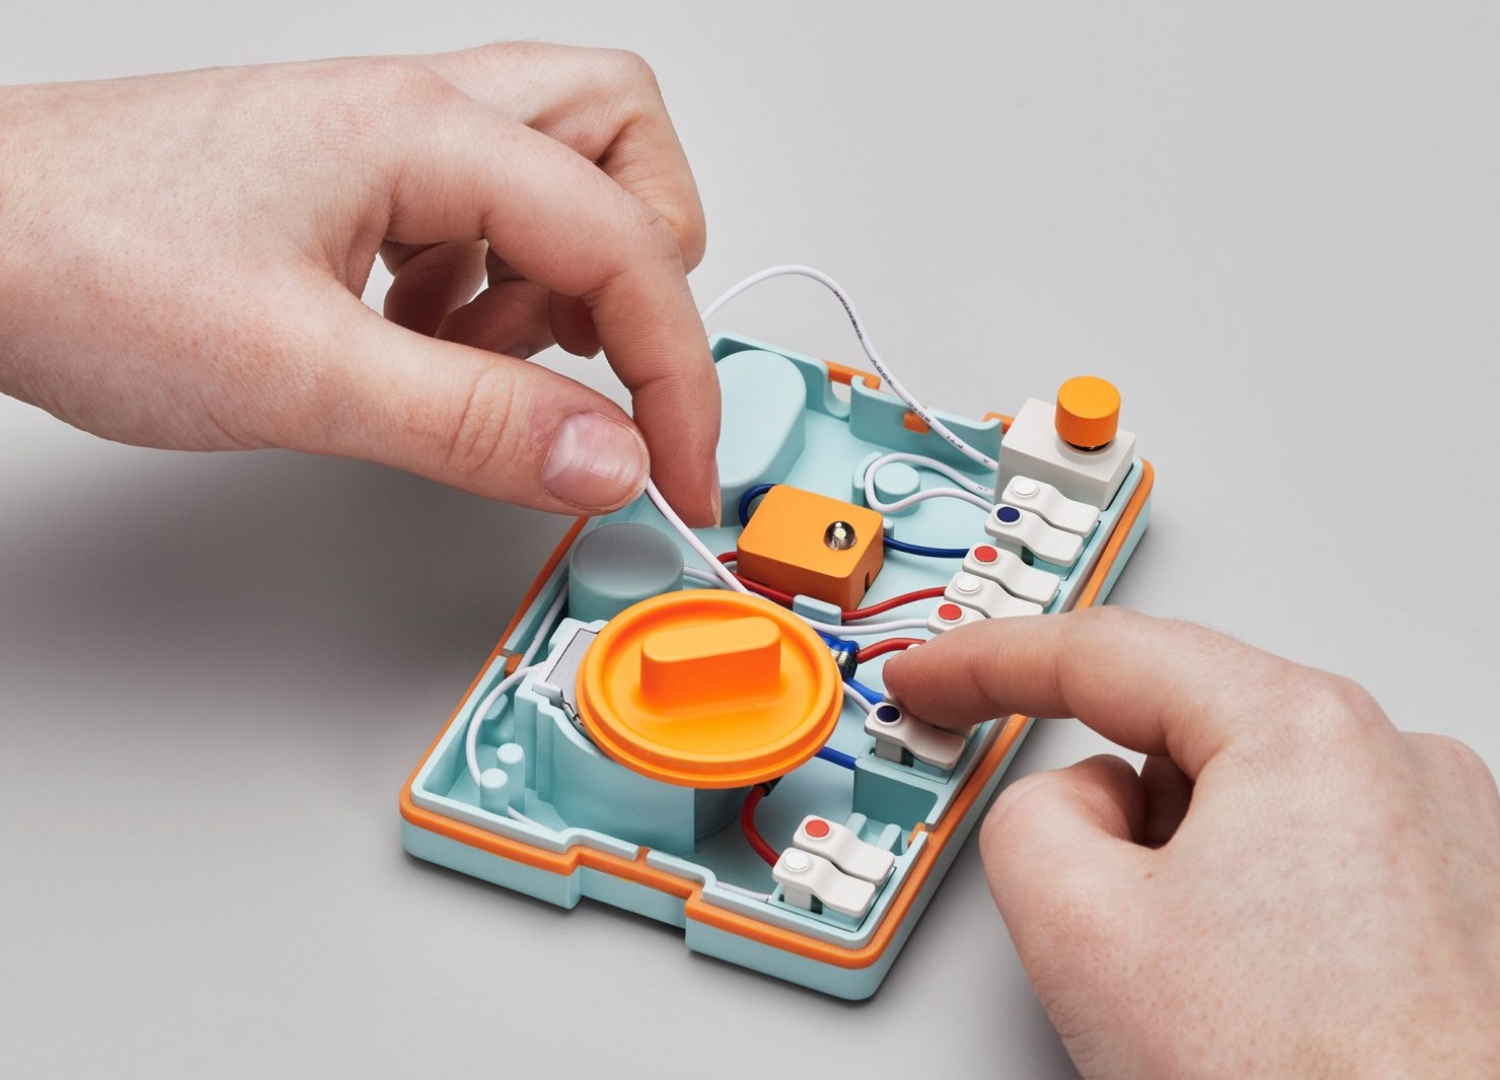 Ambessa Play Flashlight by Pentagram / DIY products making design accessible for all - from children to the elderly